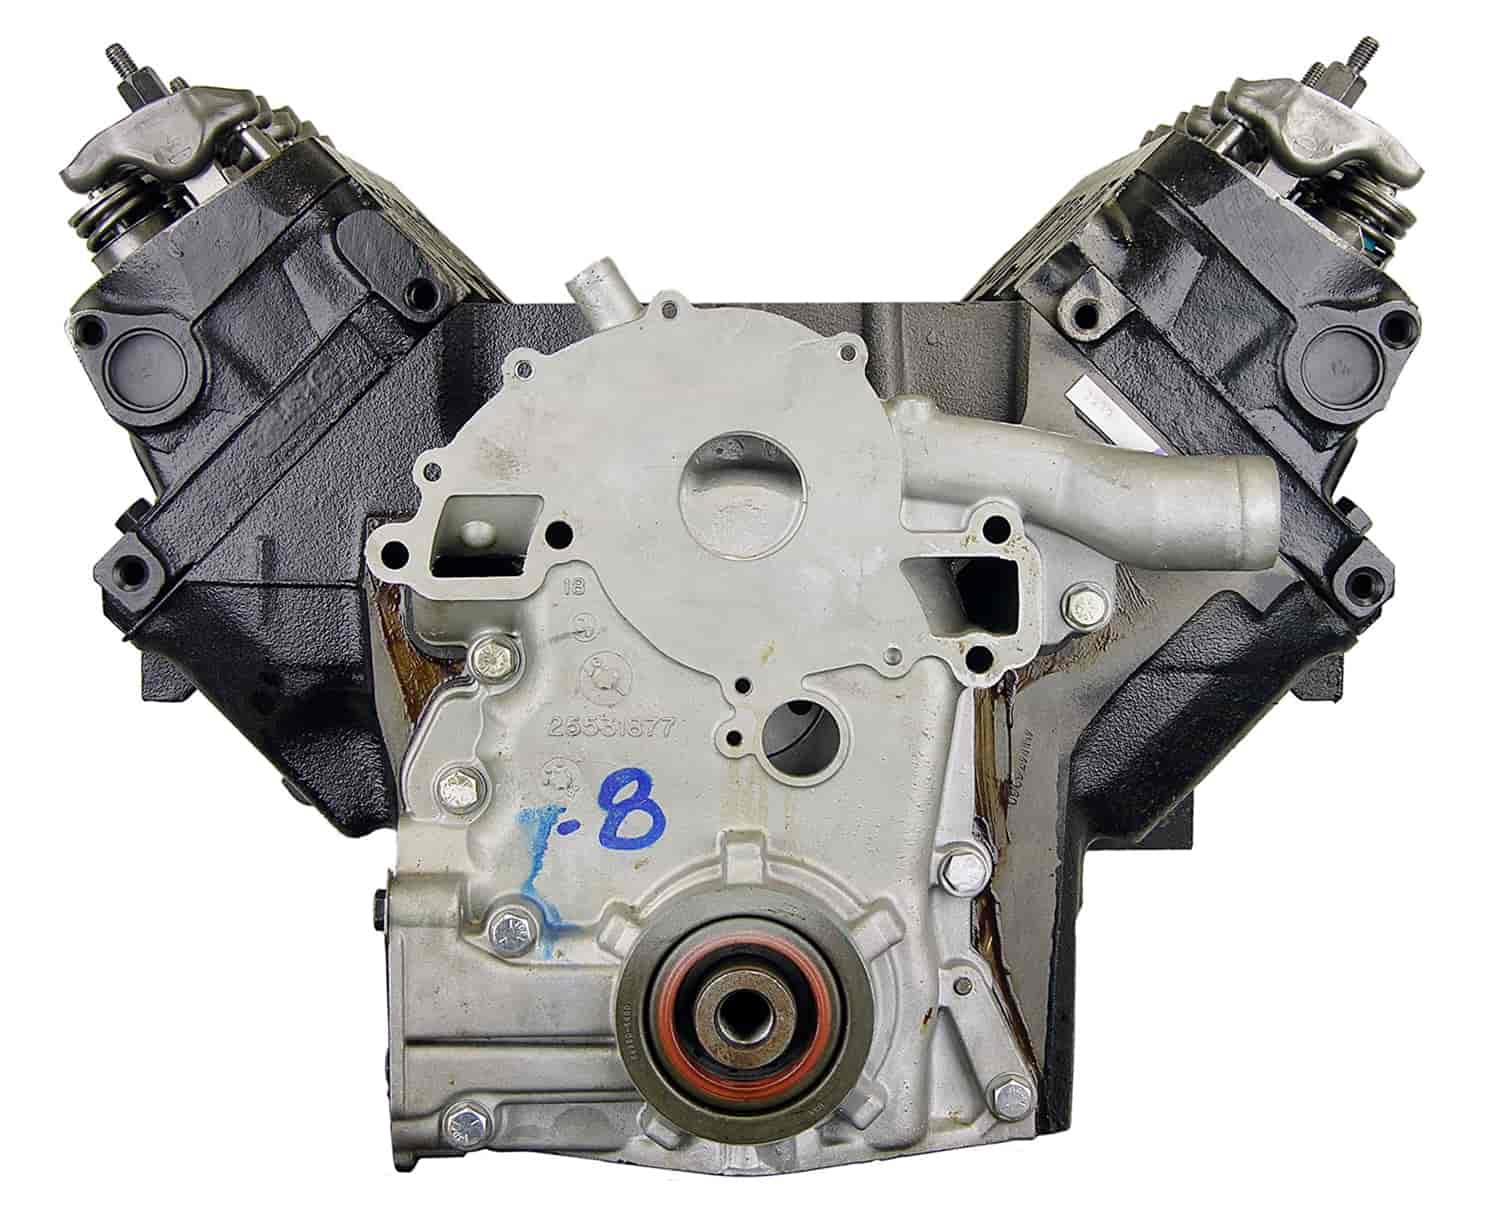 Remanufactured Crate Engine for 1986-1988 Buick/Olds/Pontiac with